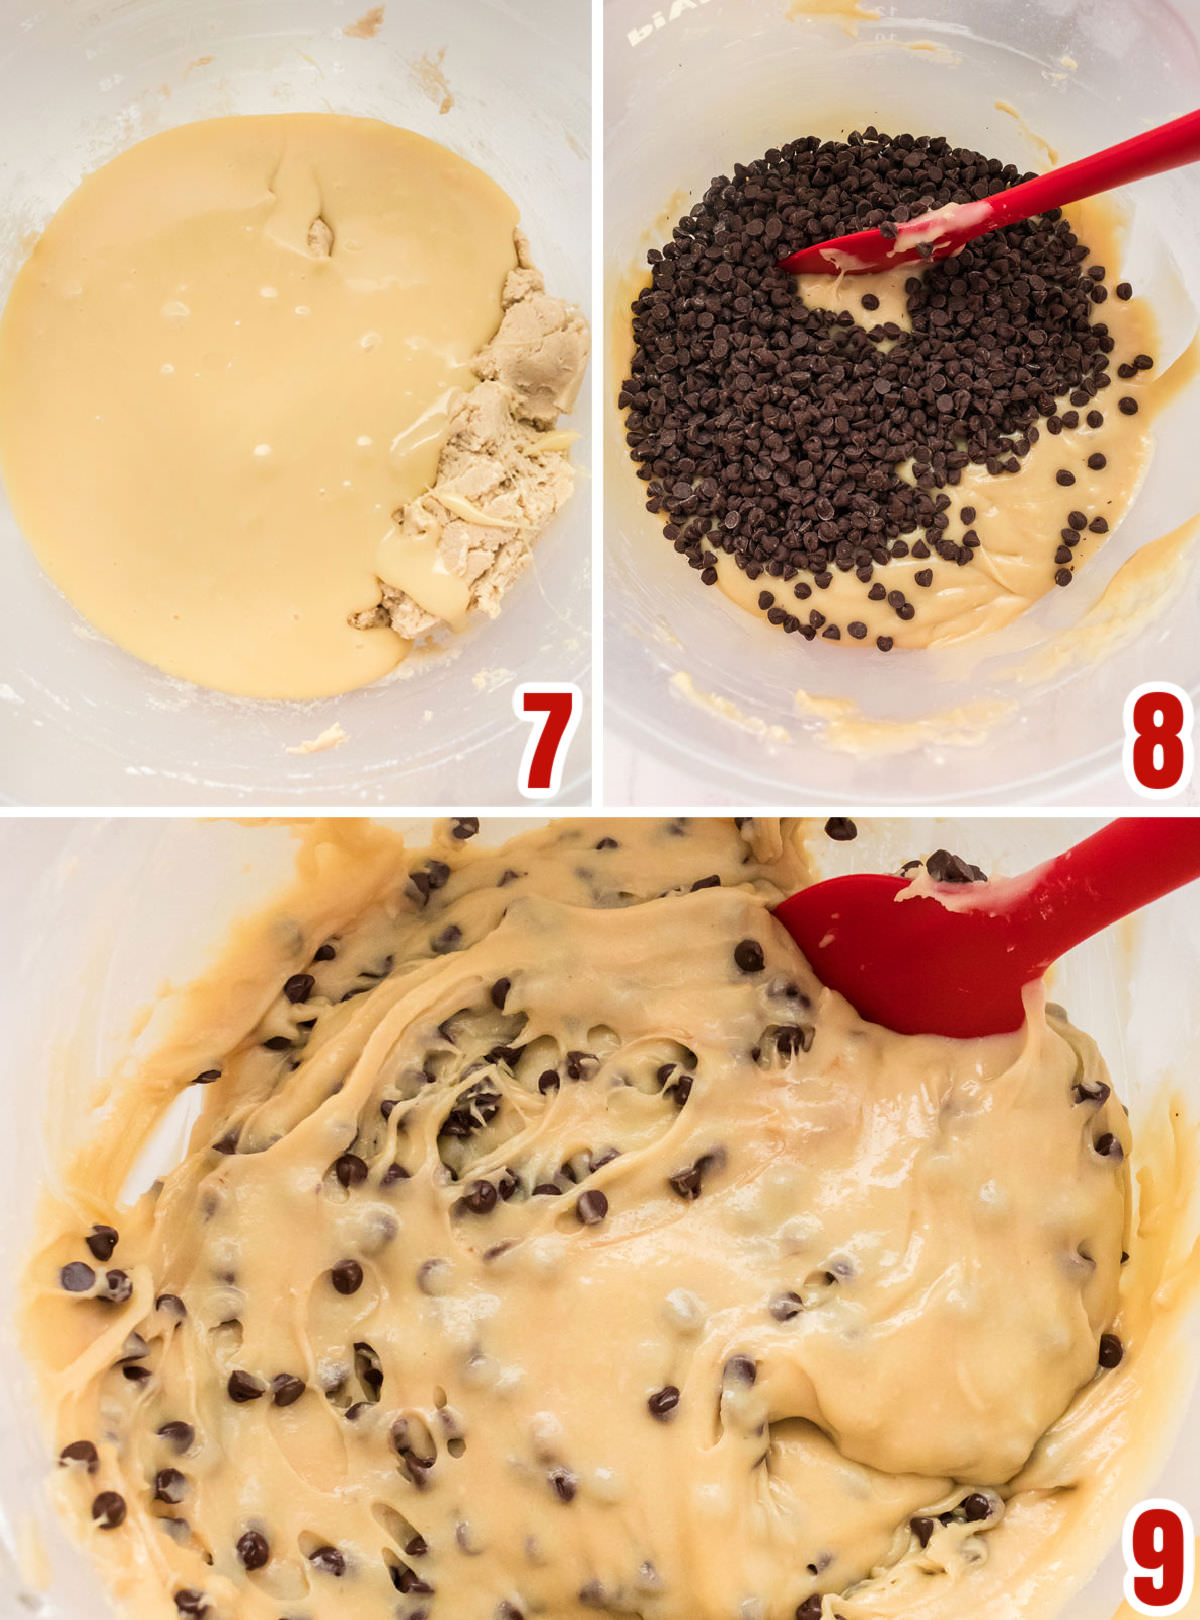 Collage image showing how to mix the cookie dough and the chocolate chips with the fudge mixture.